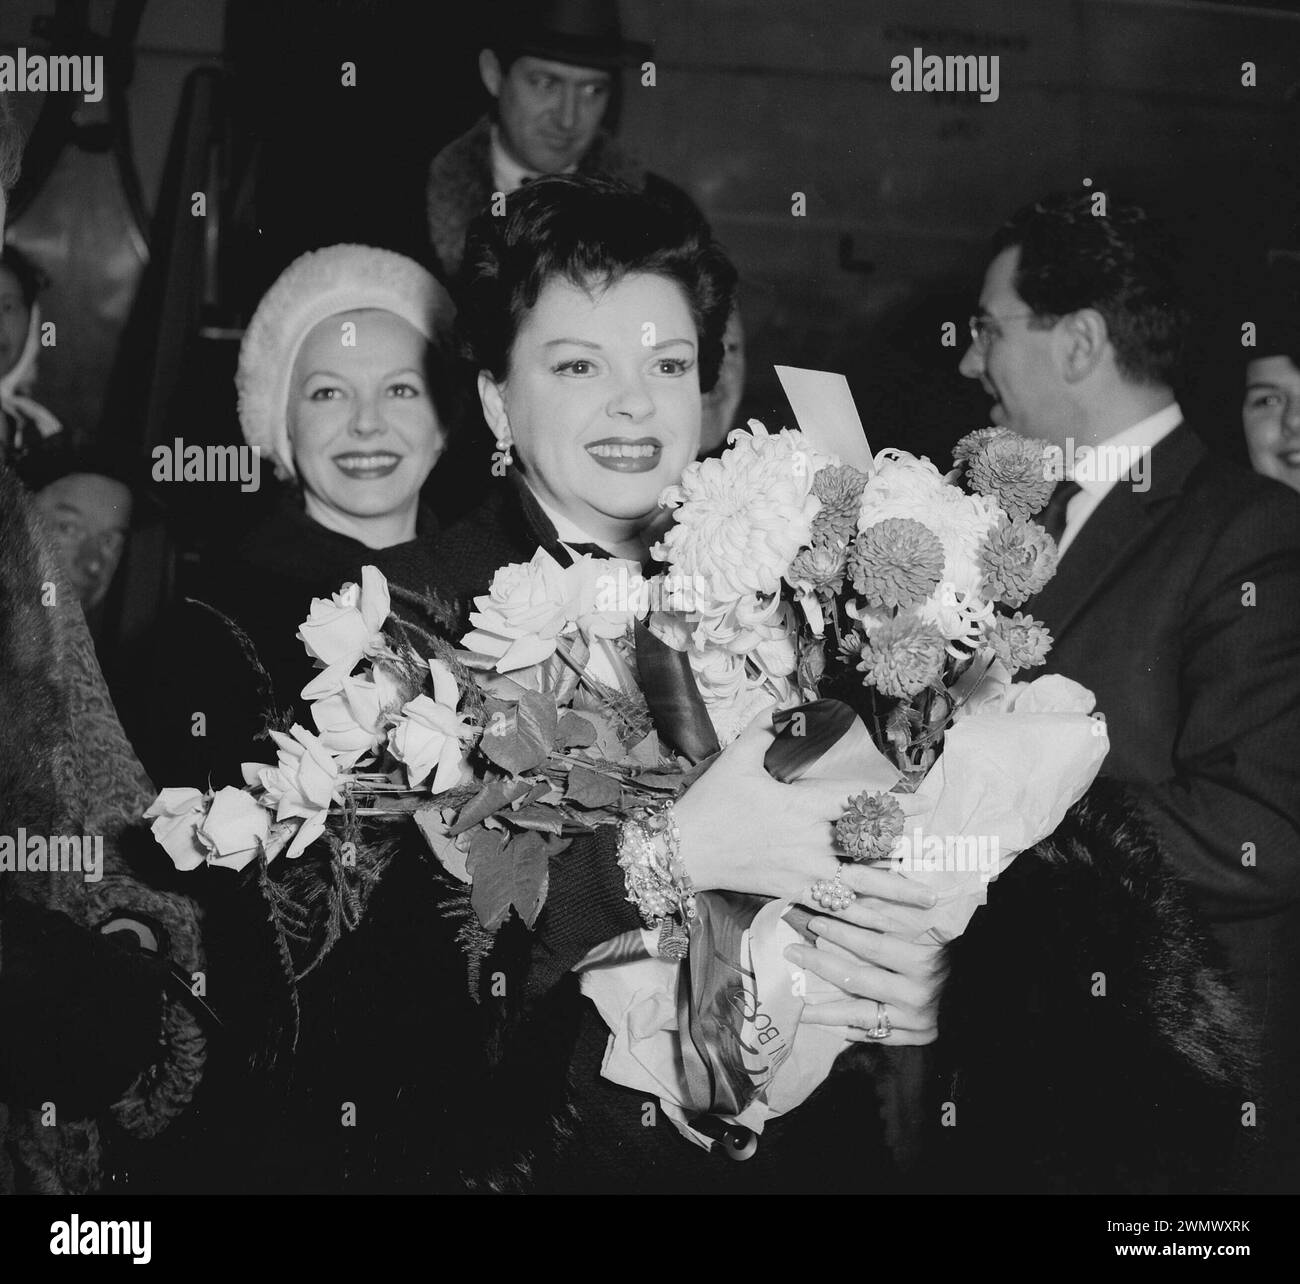 December 9, 1960. Amsterdam, Netherlands. Judy Garland with large bouquet of flowers as she arrives at Schiphol airport Stock Photo